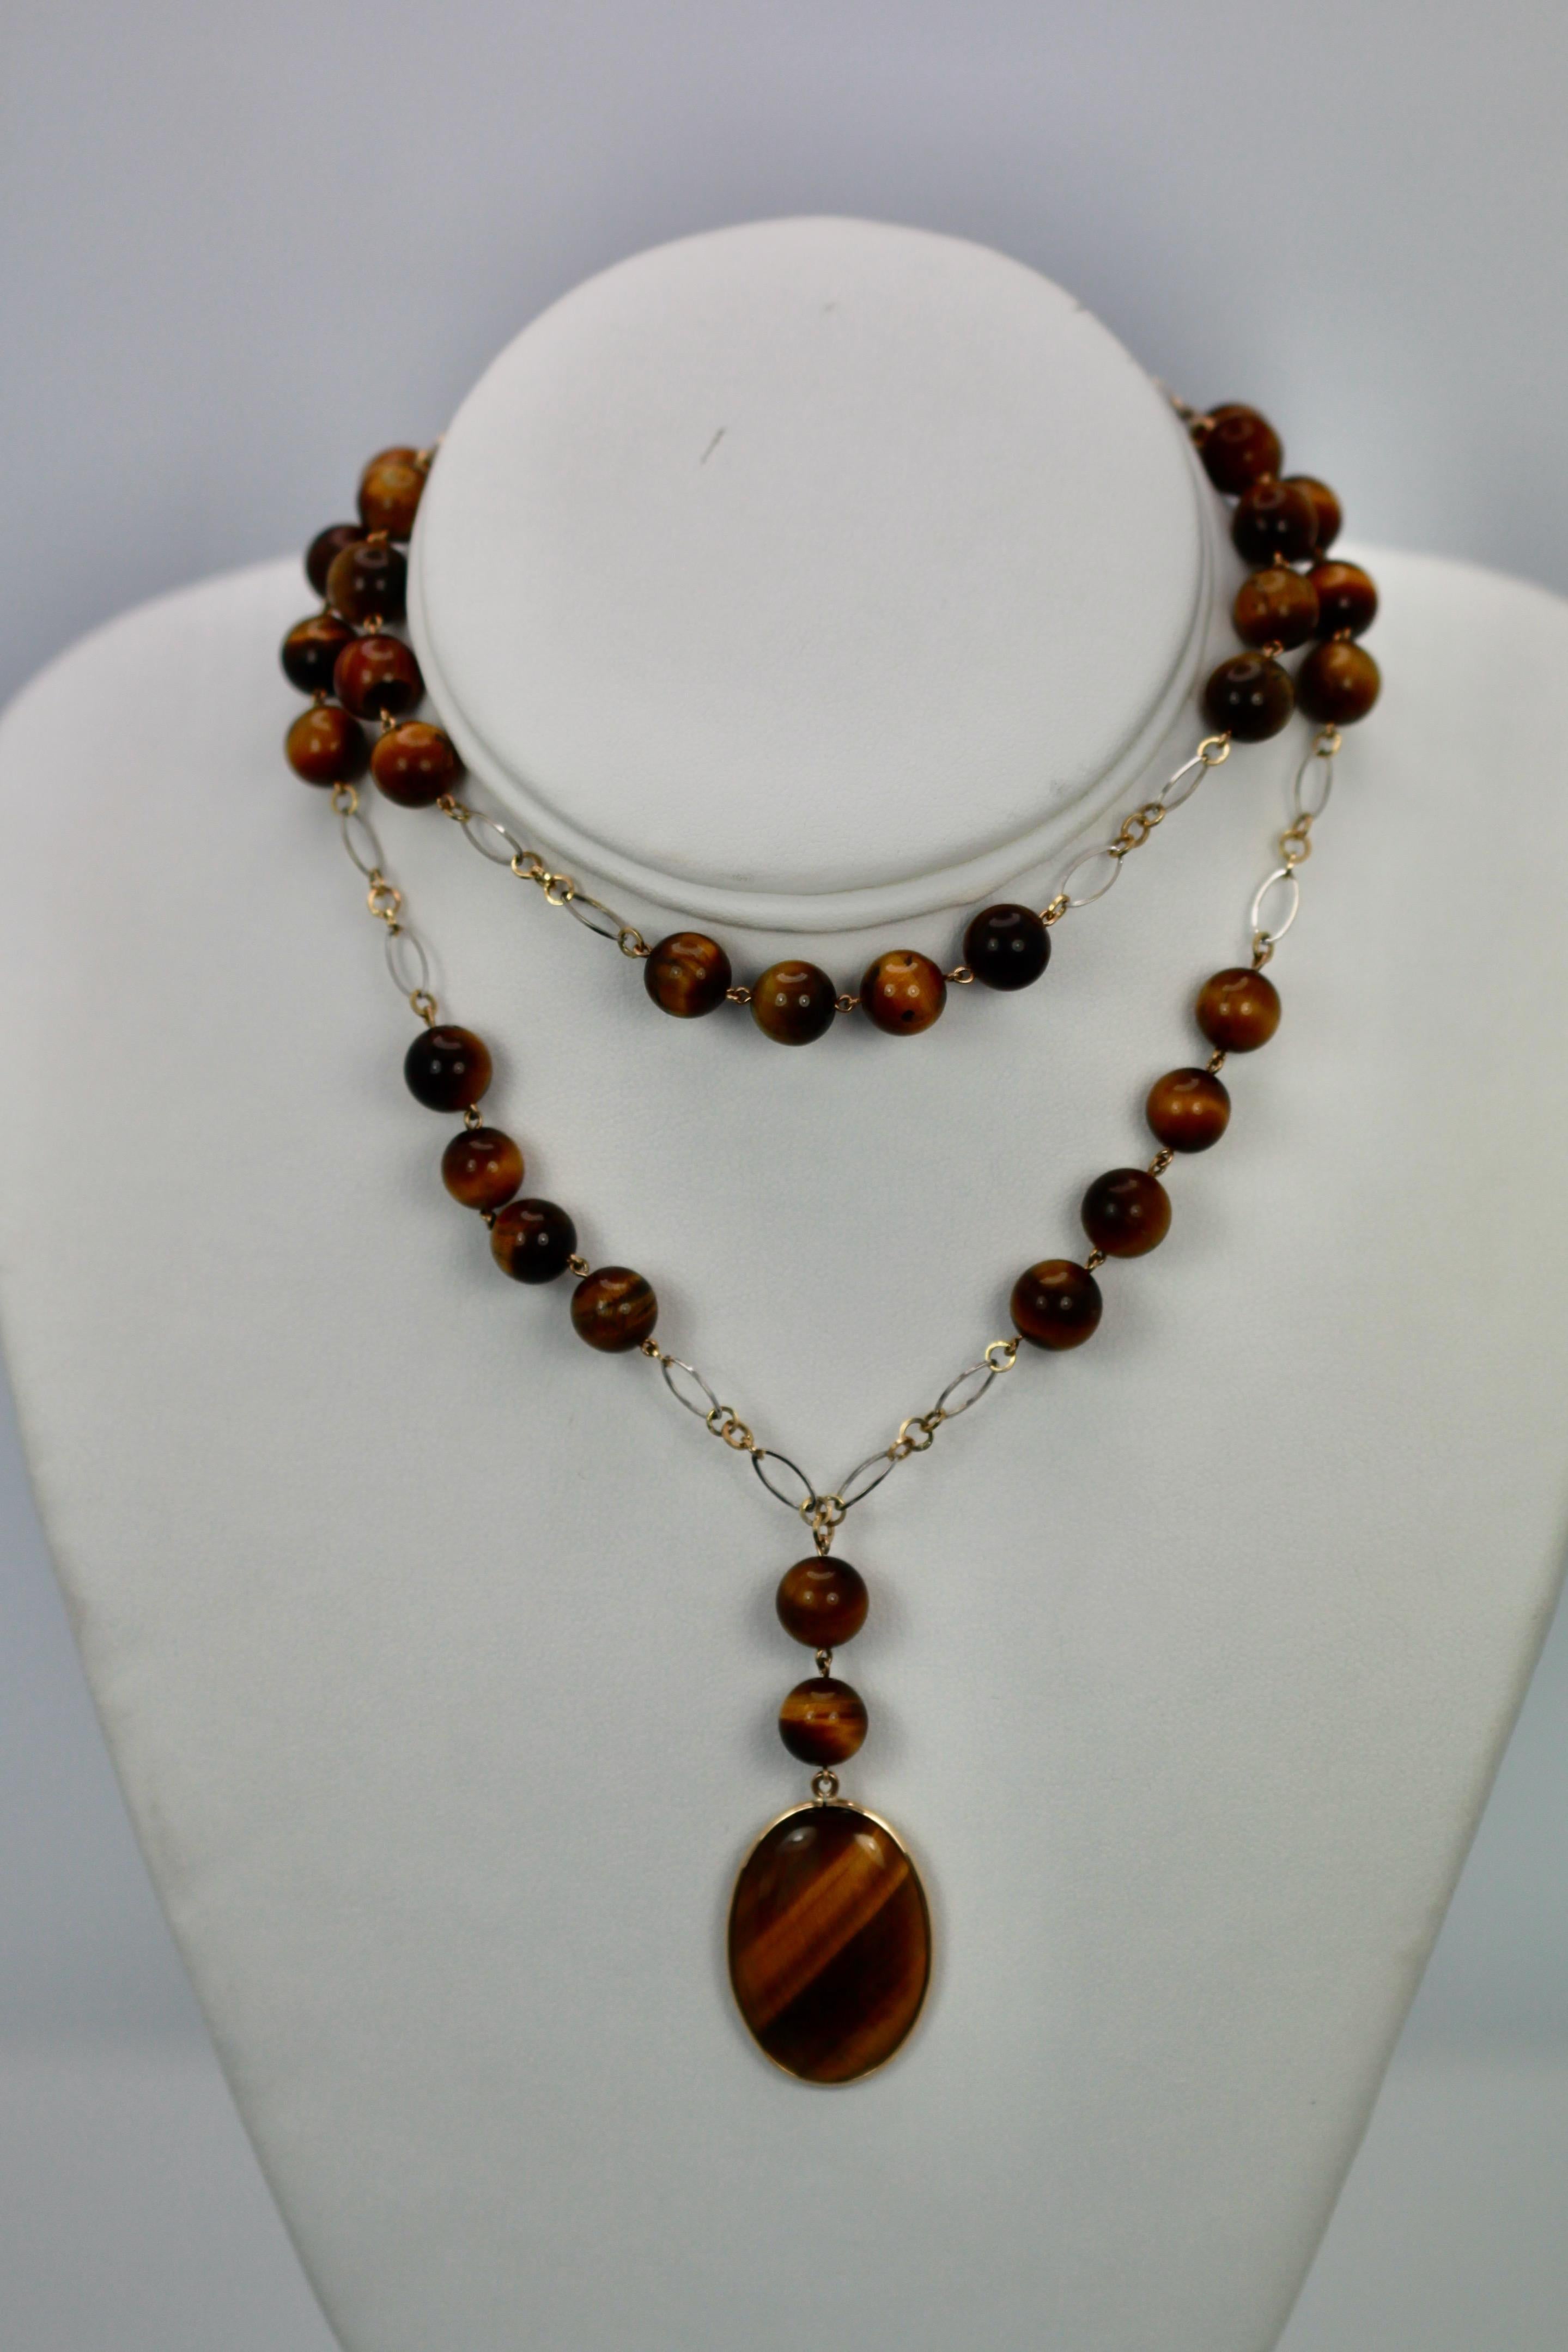 This has to be the most beautiful Tigers Eye I have ever seen.  The luster is absolutely amazing it glows.  I found these antique beads and cabochon from a retired Gemologist and just had to put them to good use. The beads are 9.20mm (large) and